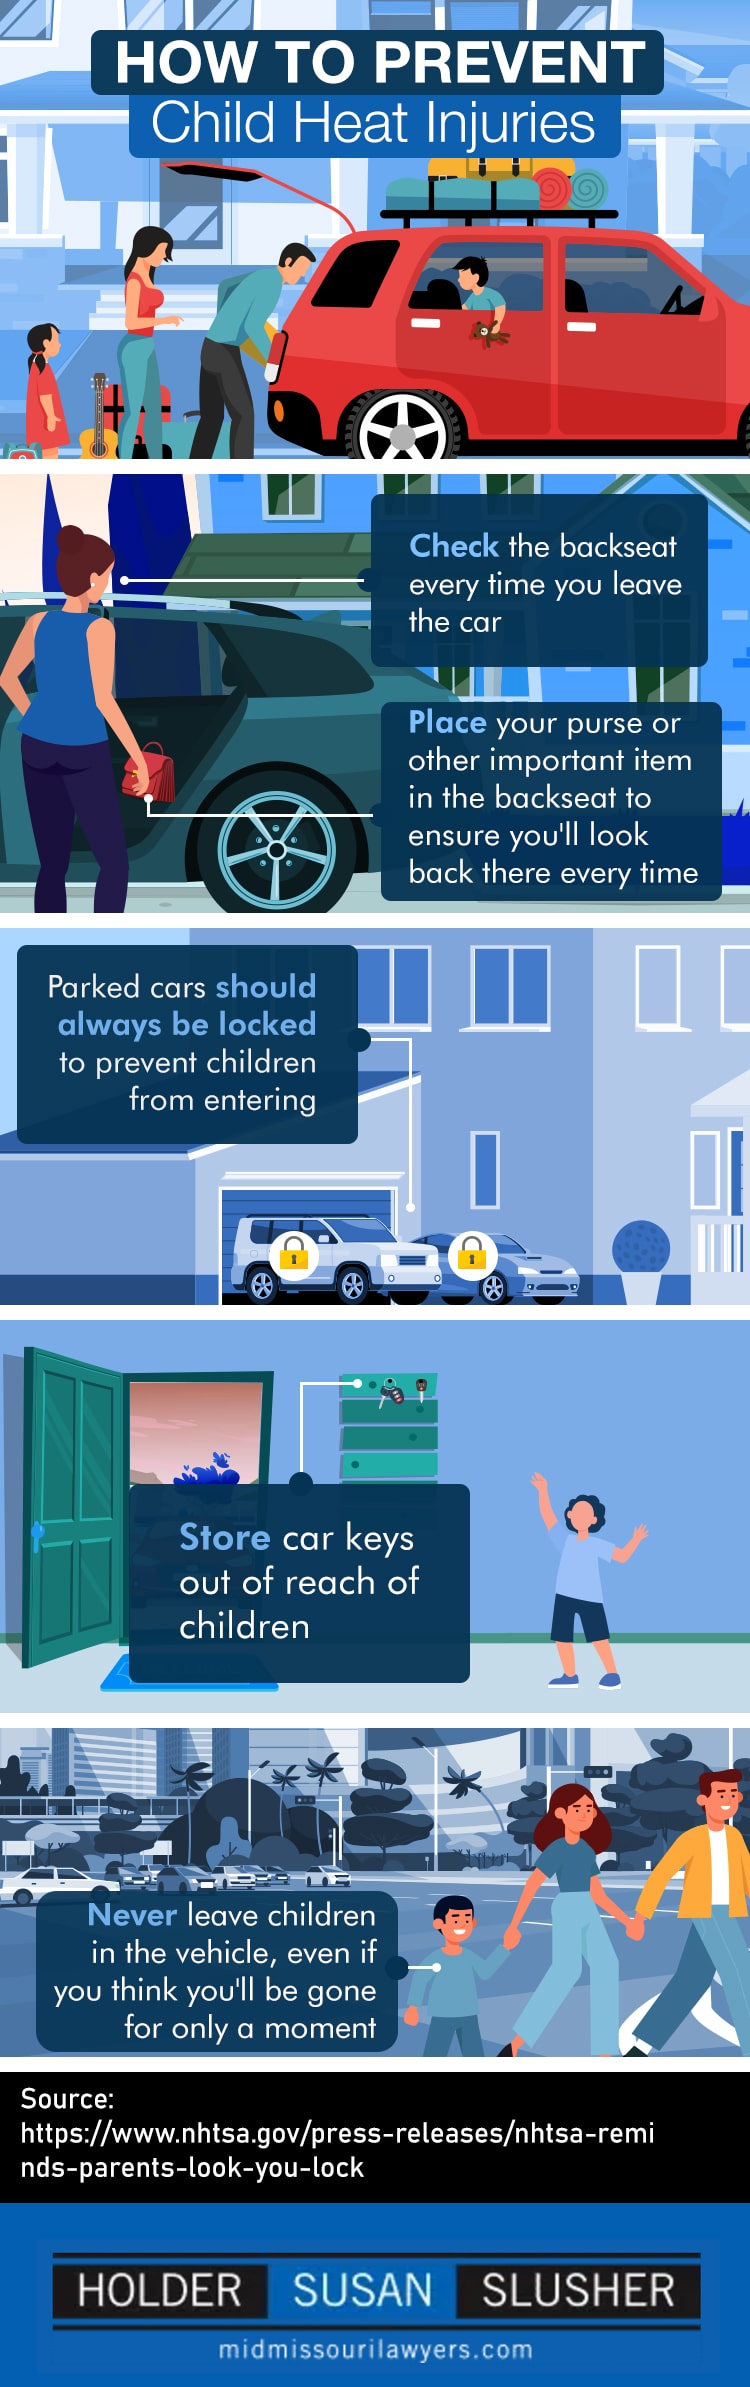 An infographic showing how to prevent child heat injuries